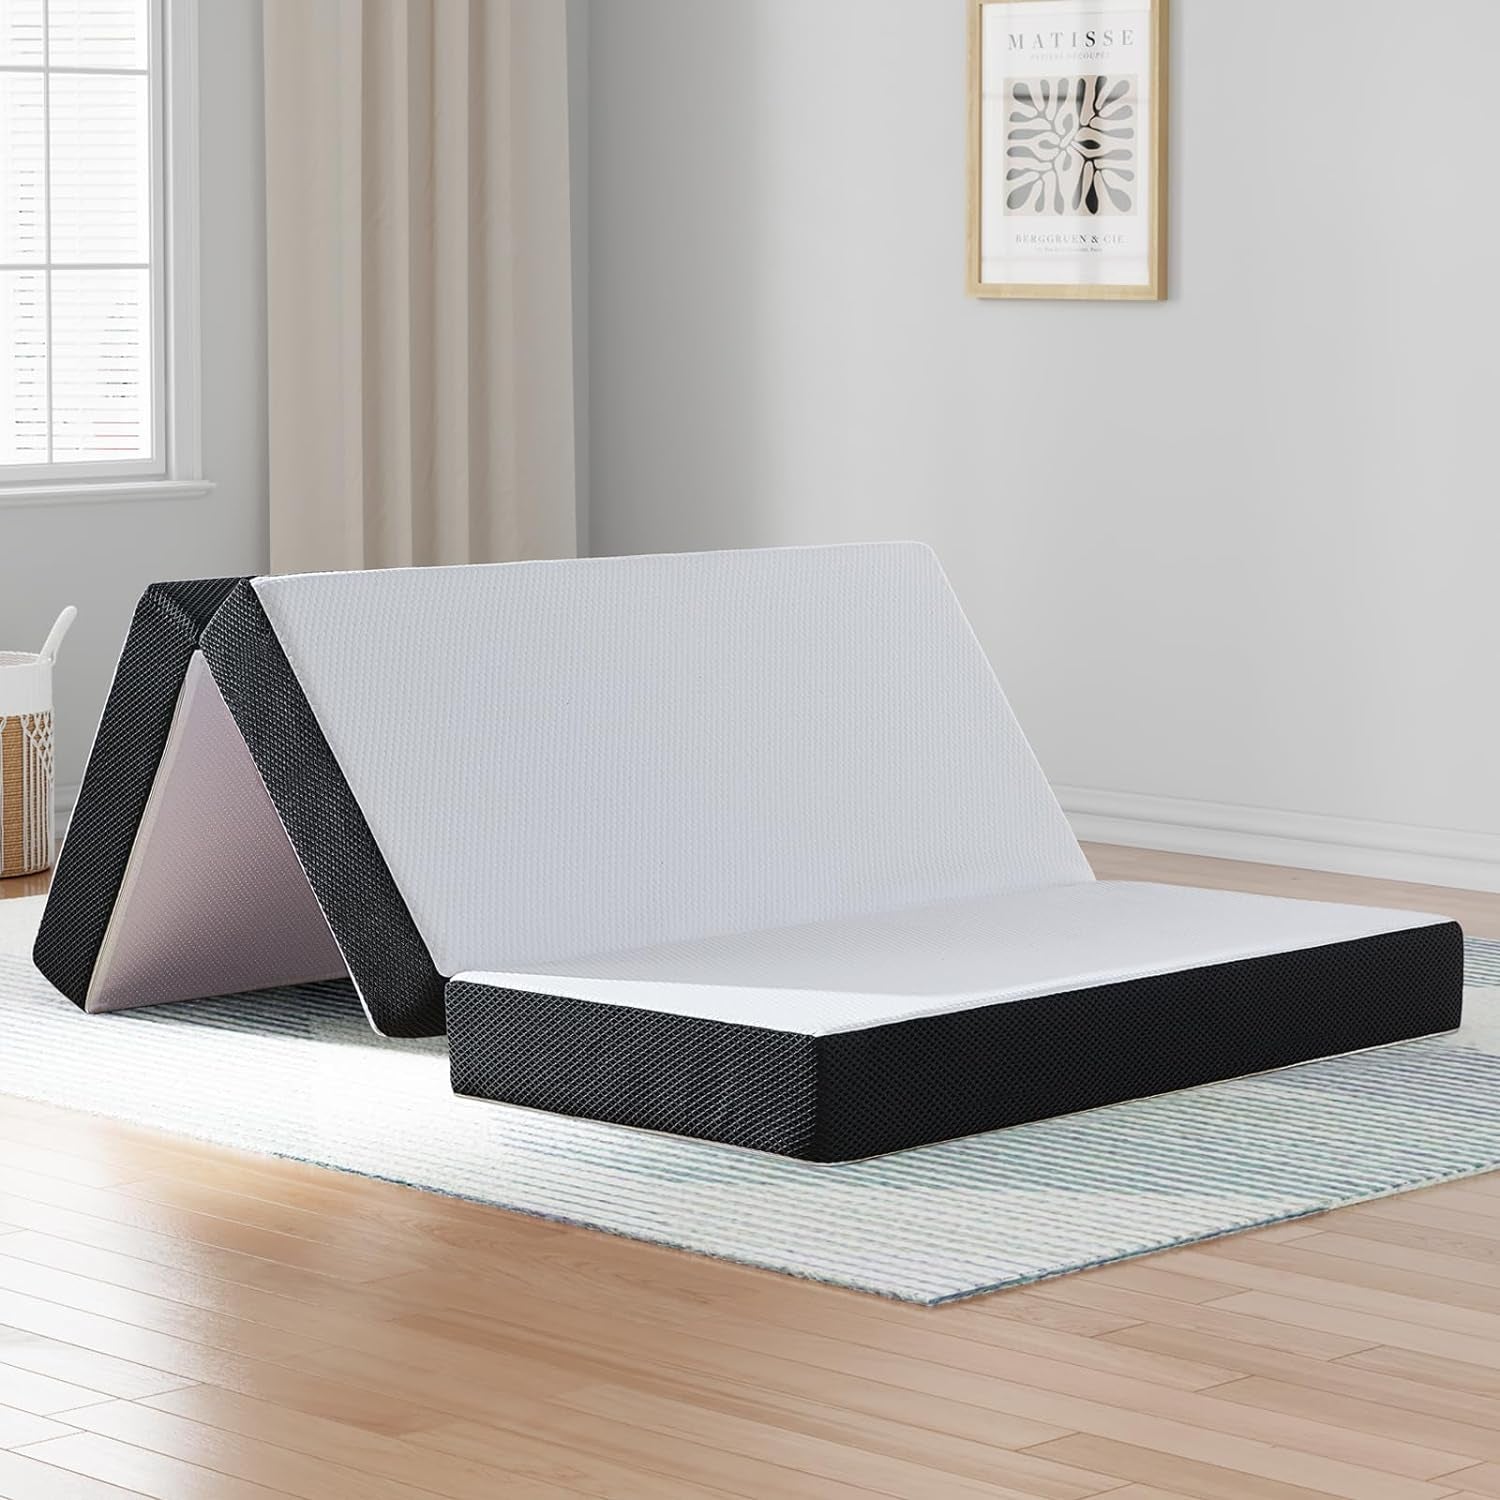 Foldable Mattress,6 Inch Queen Mattress,Tri-Fold Memory Foam Mattress Topper,Folding Mattress with Washable Cover,Topper for Camping, Guest - Queen Size, 78"" X 58"" X 6""